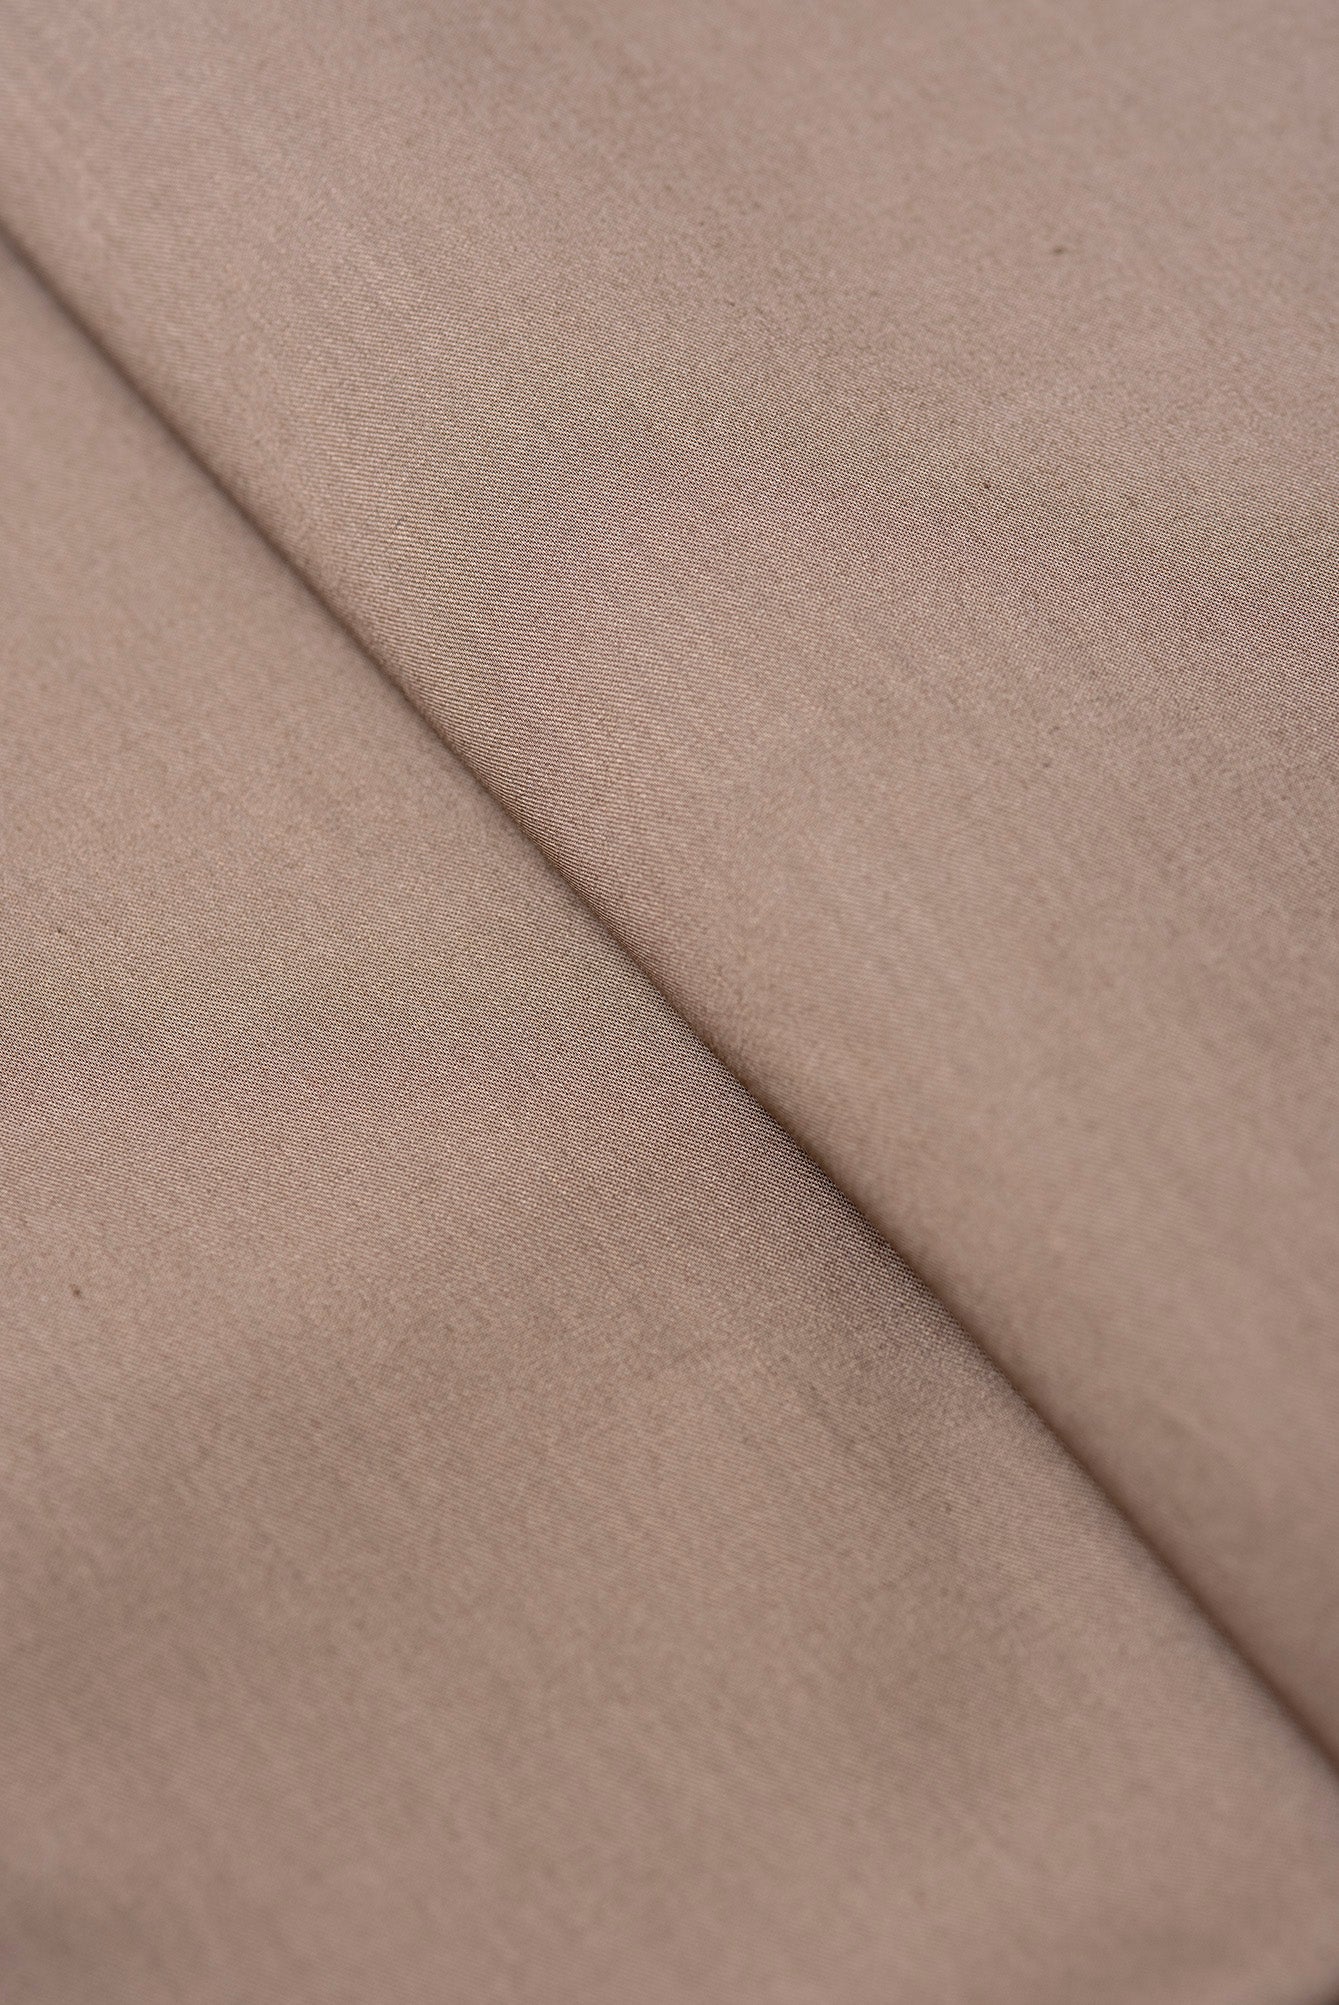 COTTON FABRIC CAMEL GLF-IMPERIAL